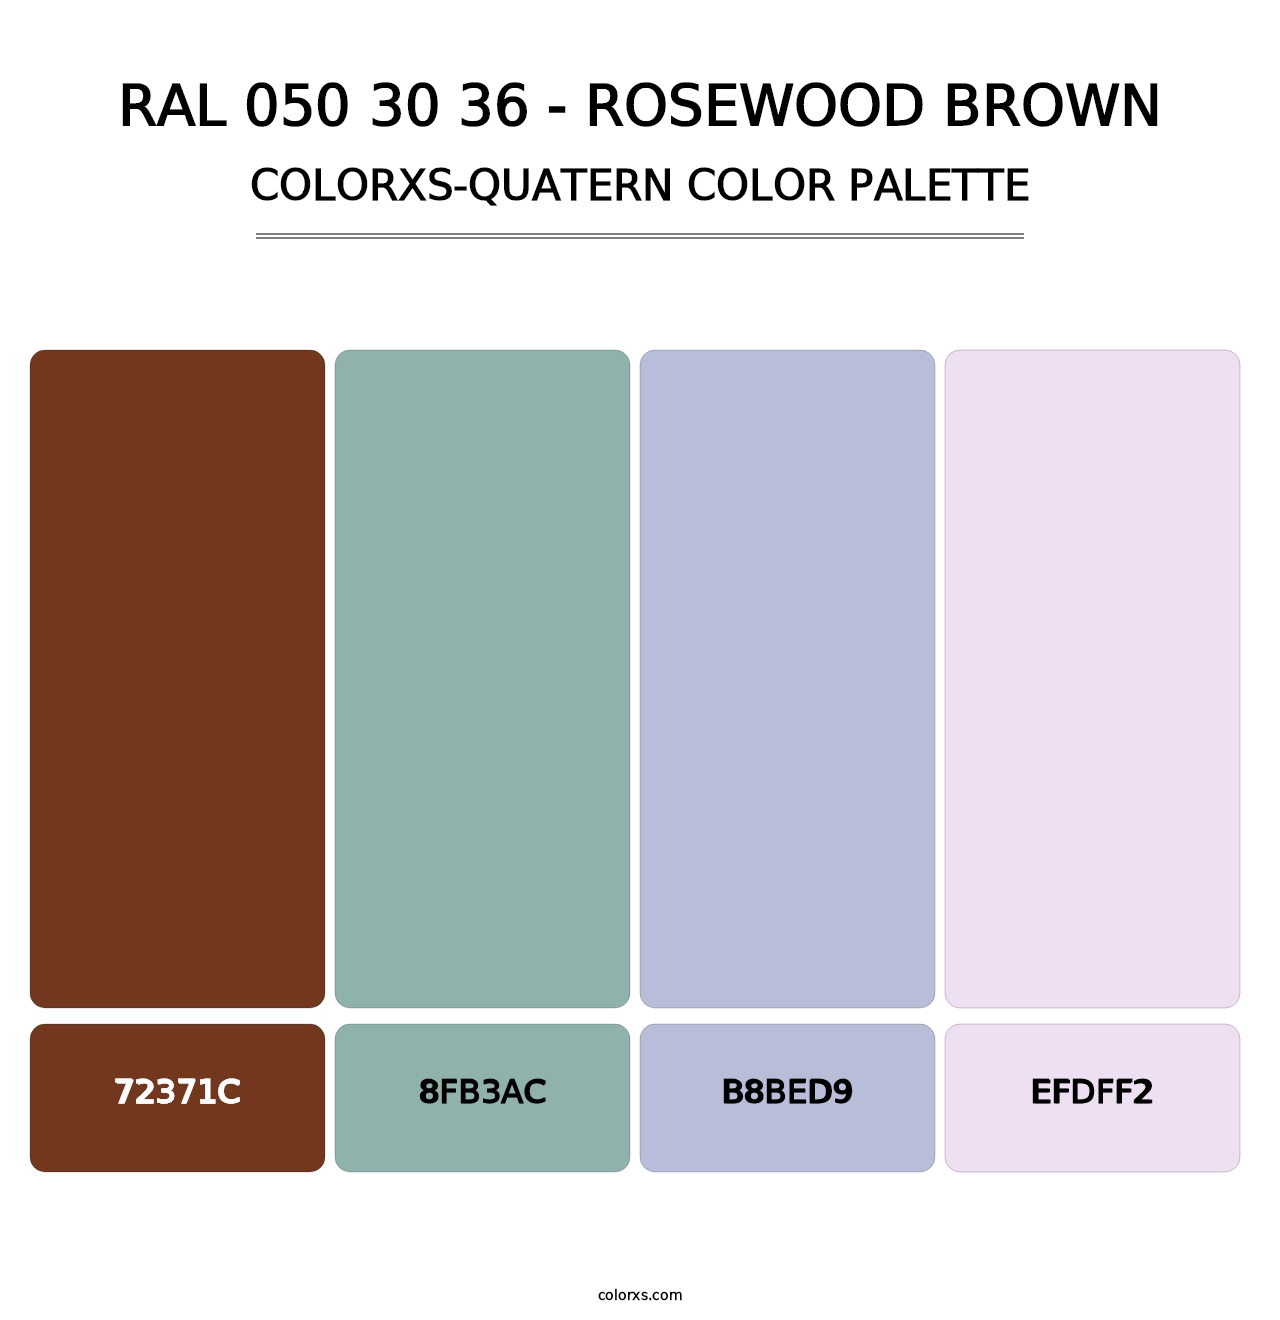 RAL 050 30 36 - Rosewood Brown - Colorxs Quatern Palette